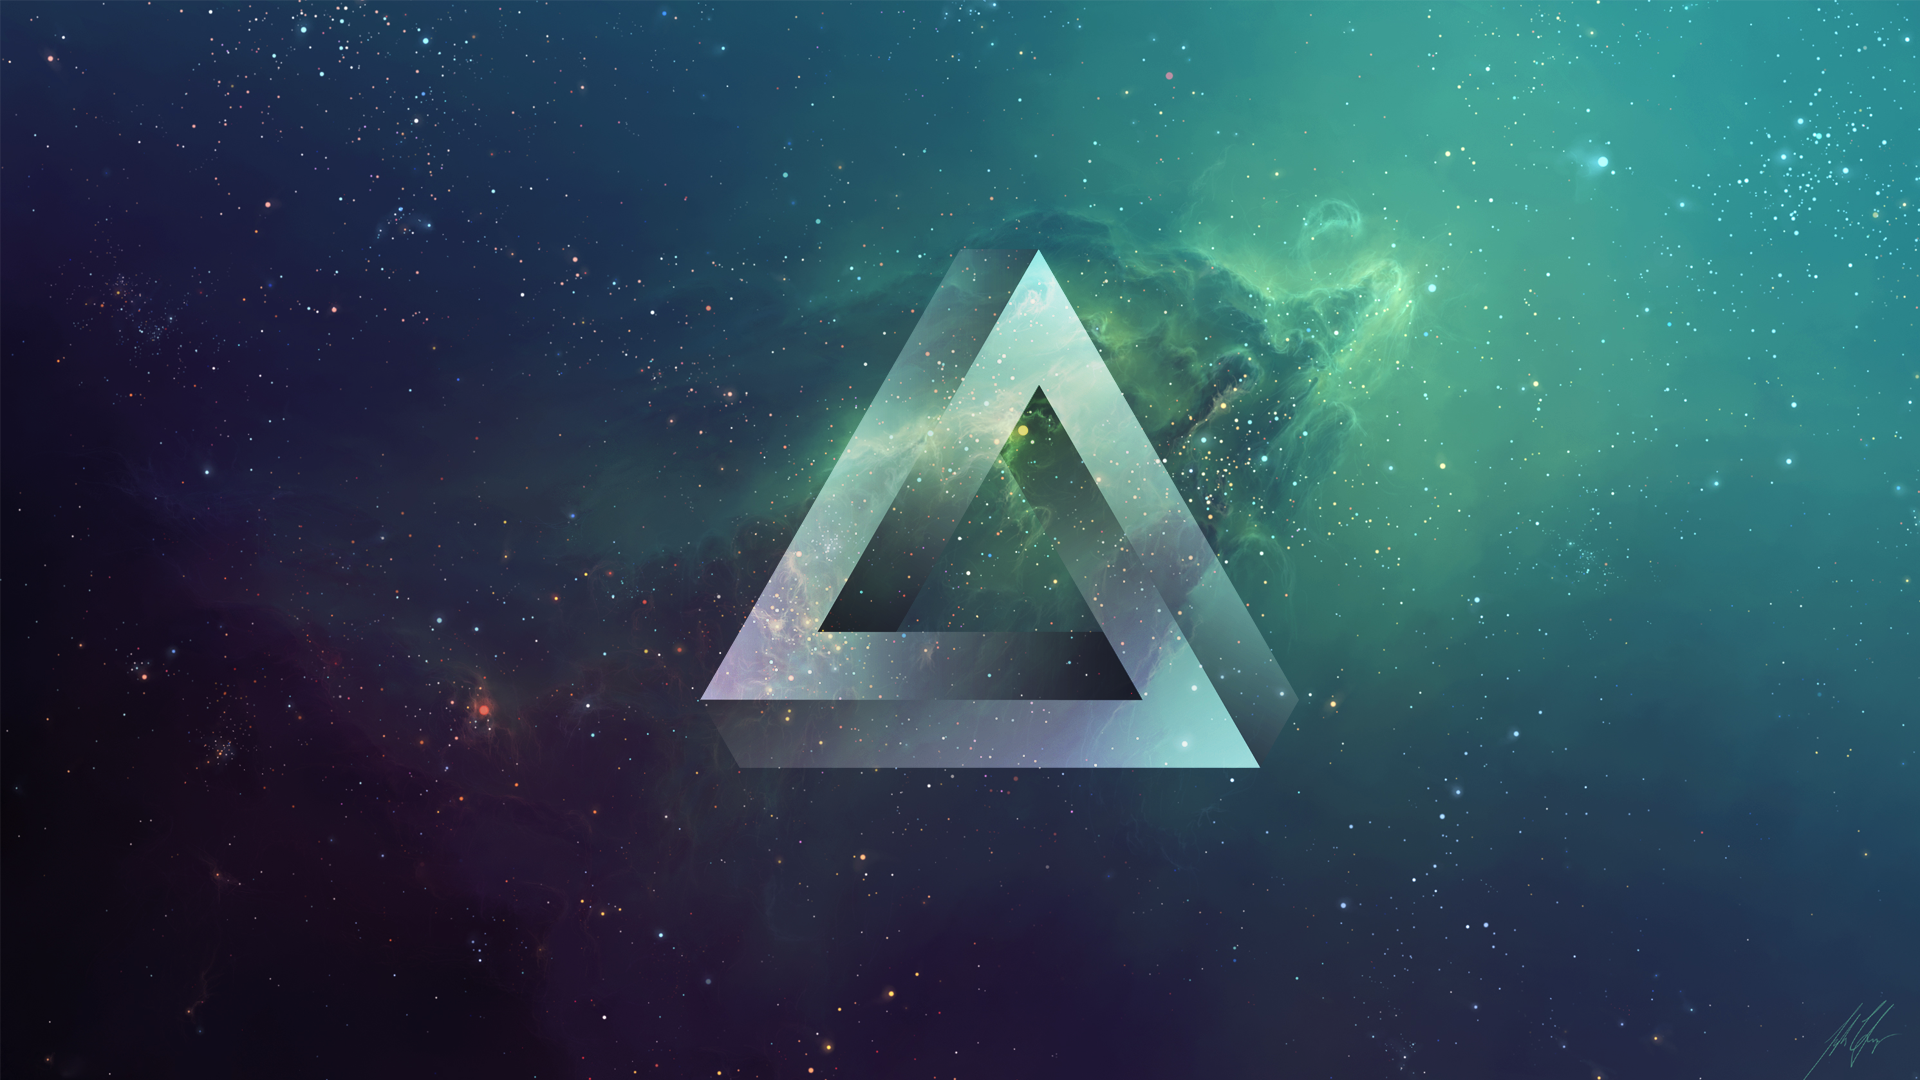 1920x1080] Impossible triangle (from request) : wallpaper